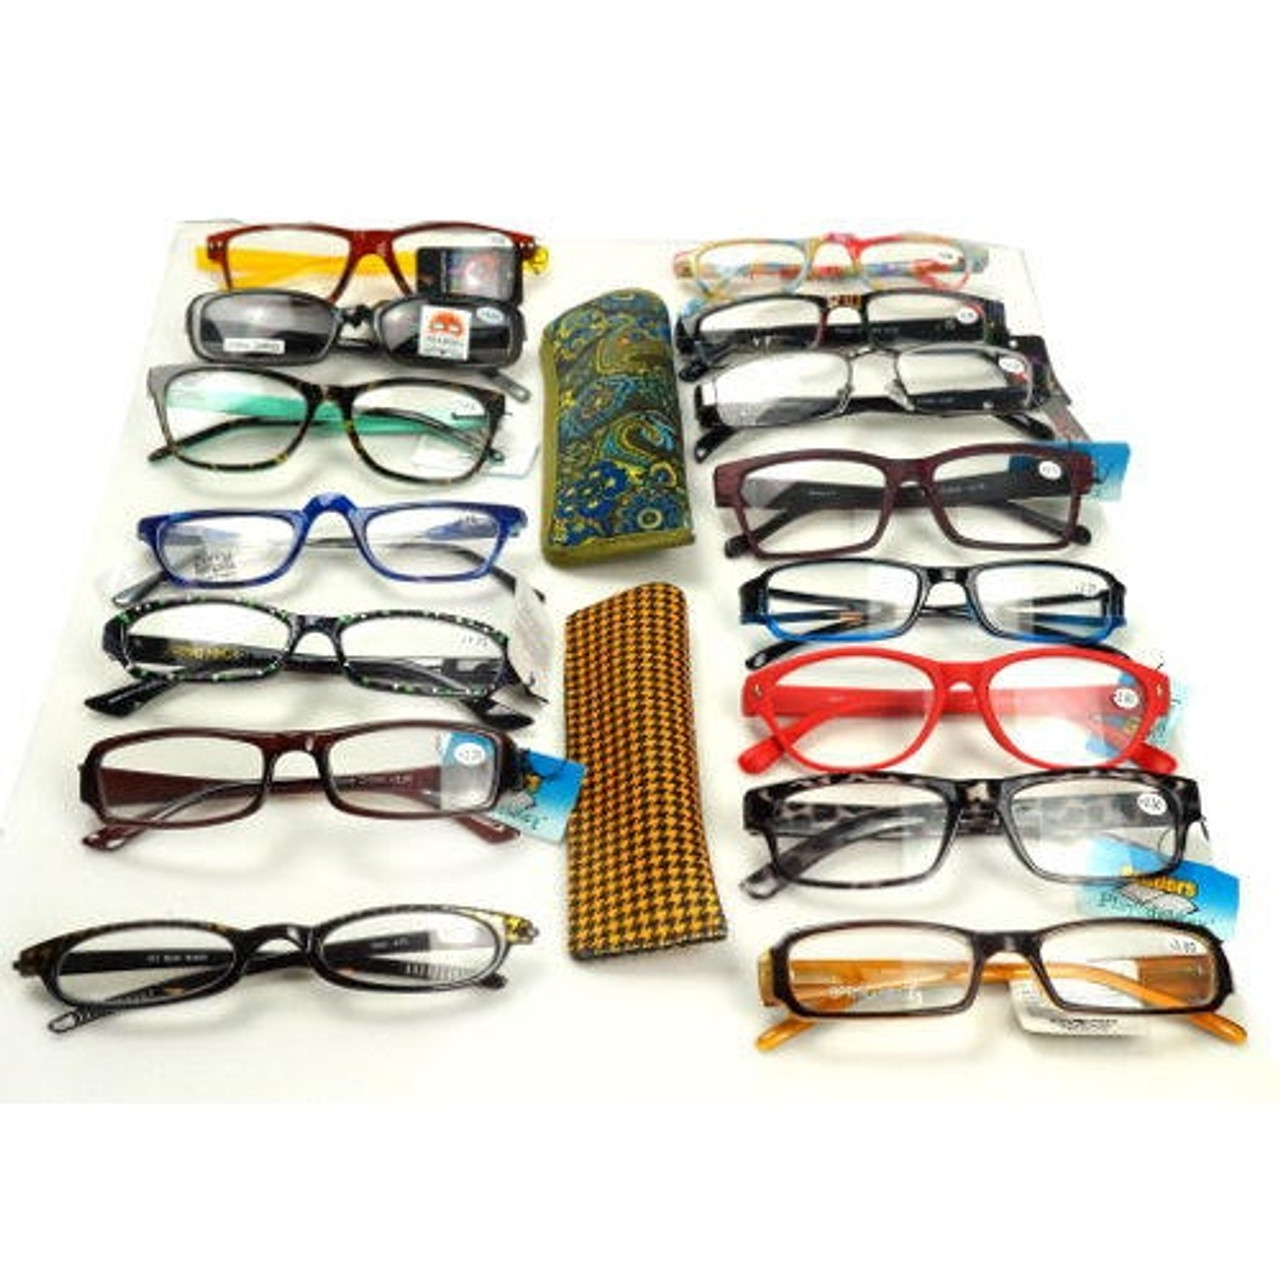 “…But now I see” Reading Glasses Project